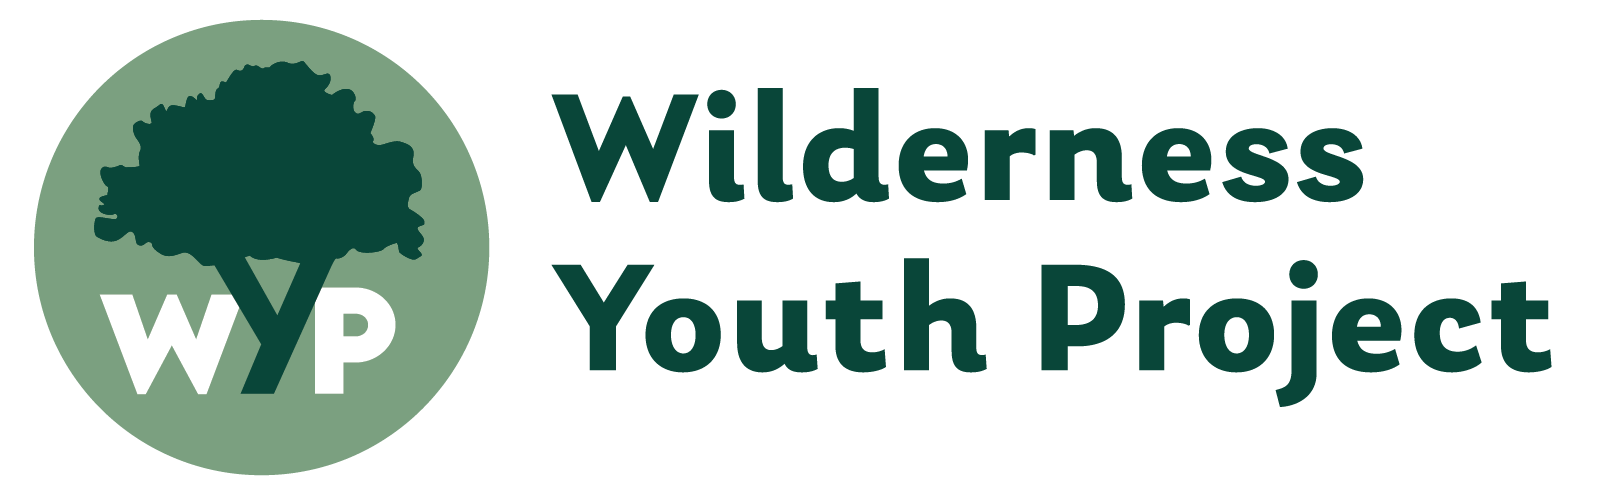 Logotipo de Wilderness Youth Project